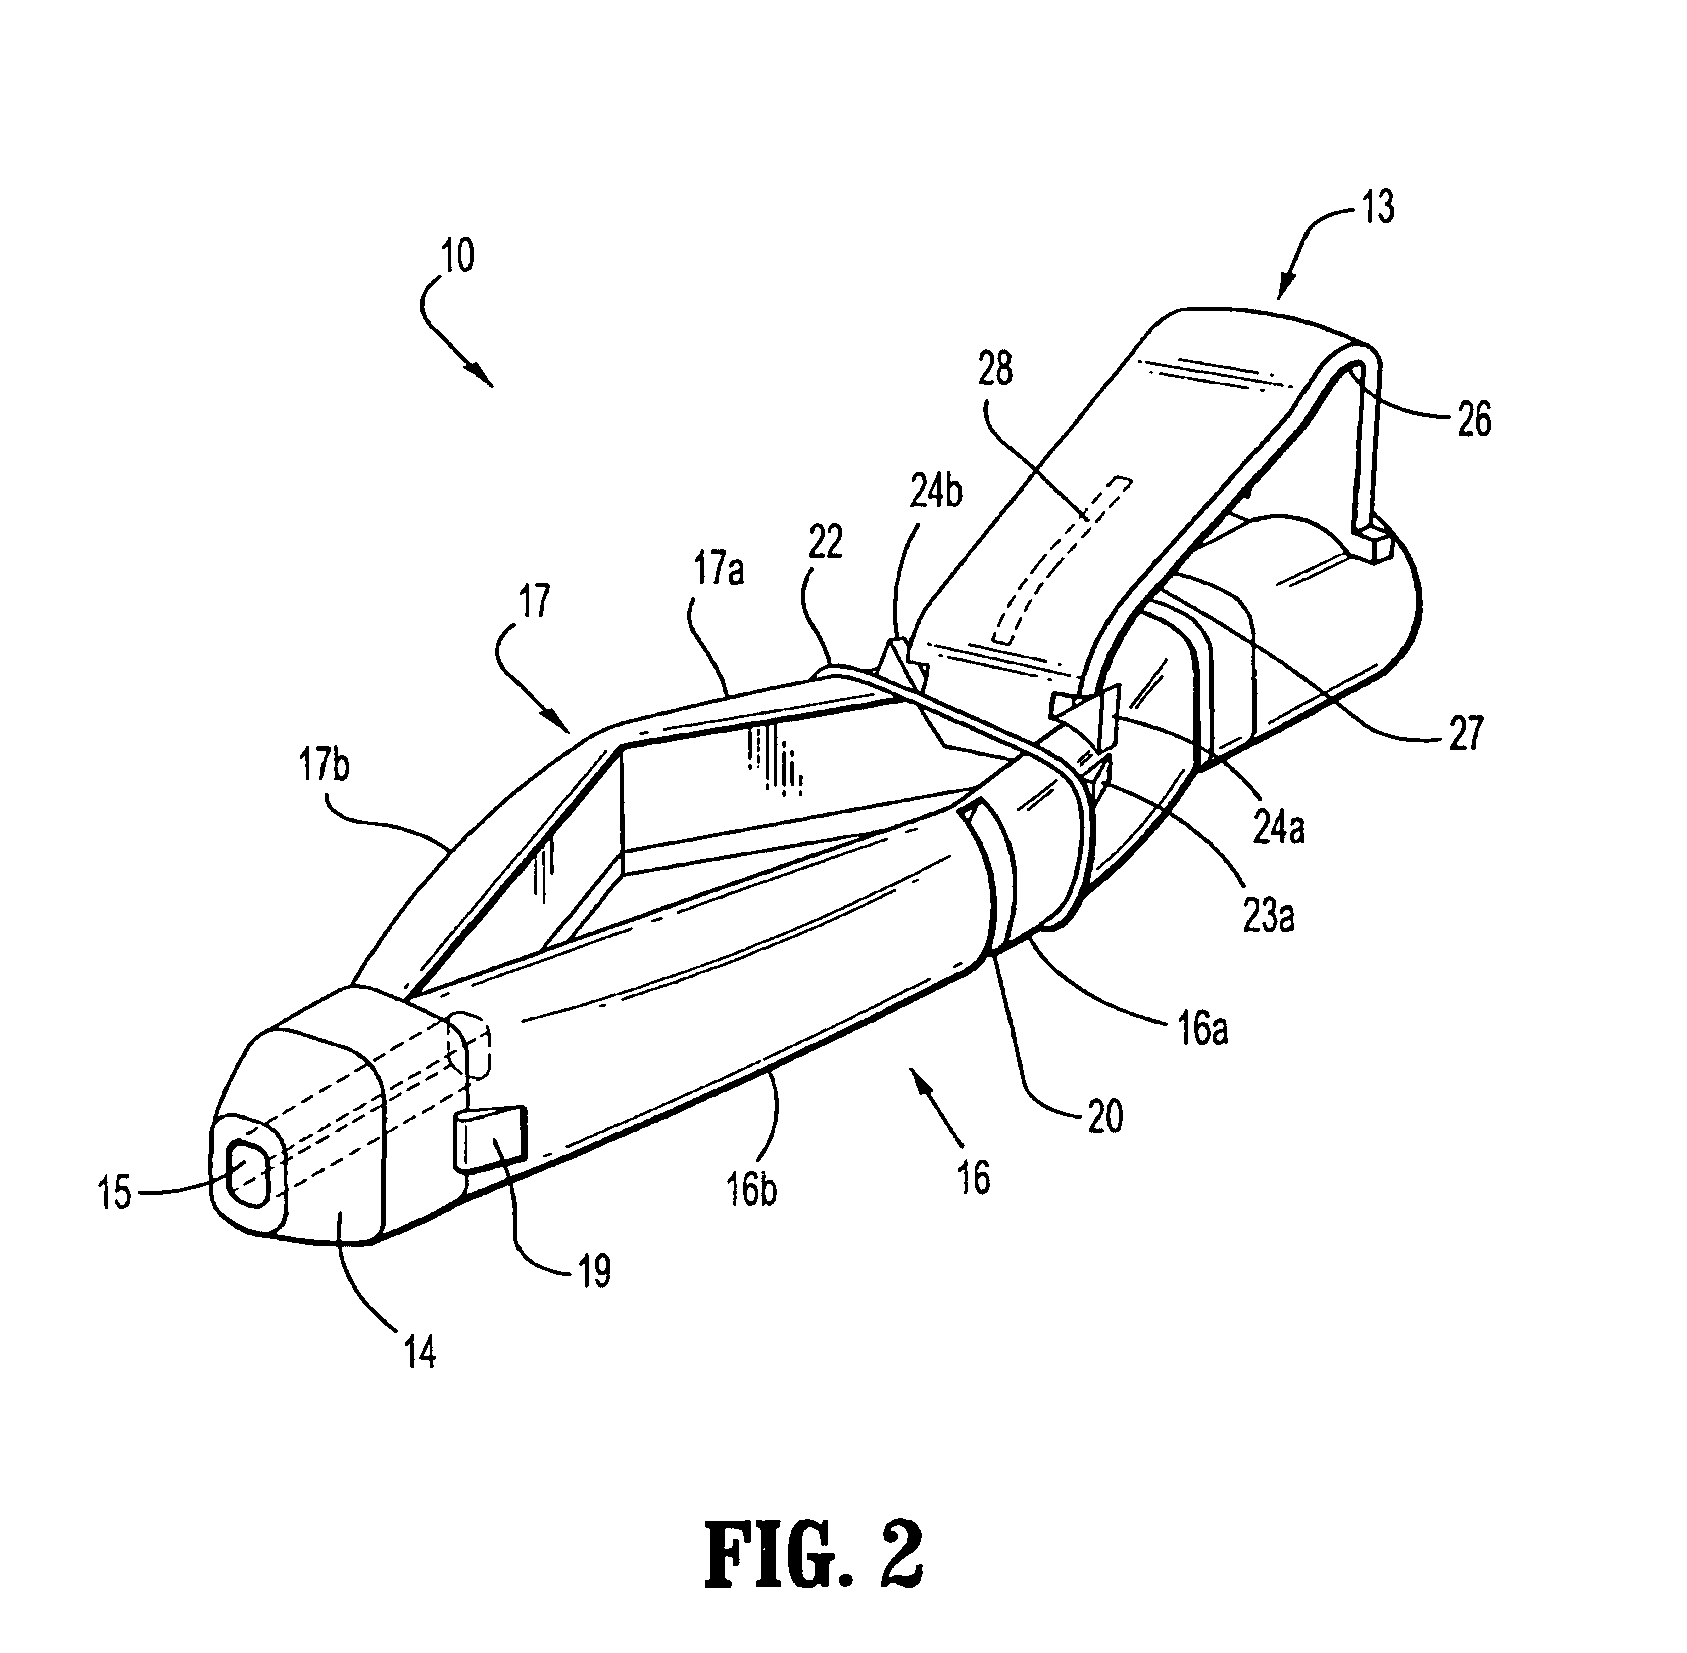 Safety device with trigger mechanism